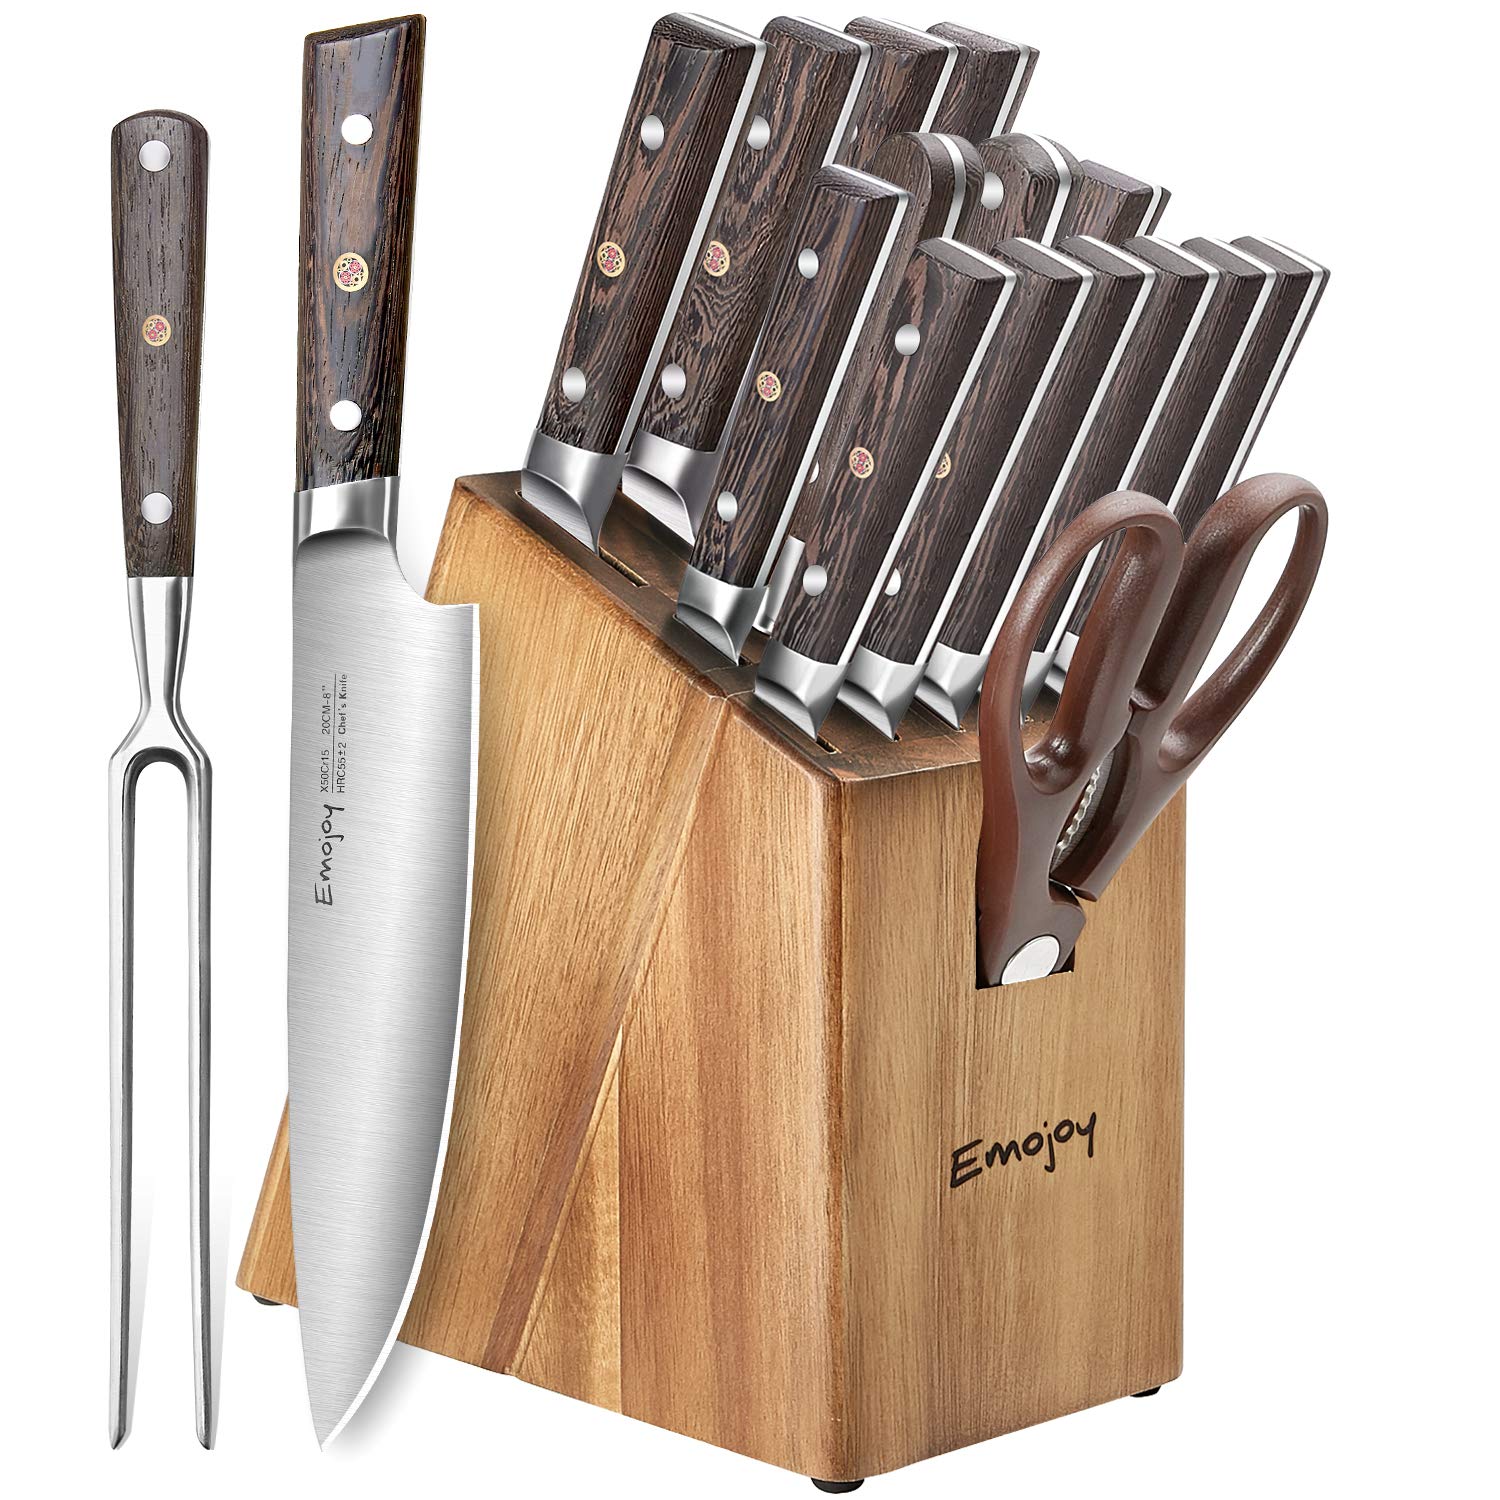 Top 10 Best Kitchen Knife Sets Best Choice Reviews,Italian For Grandmother And Grandfather